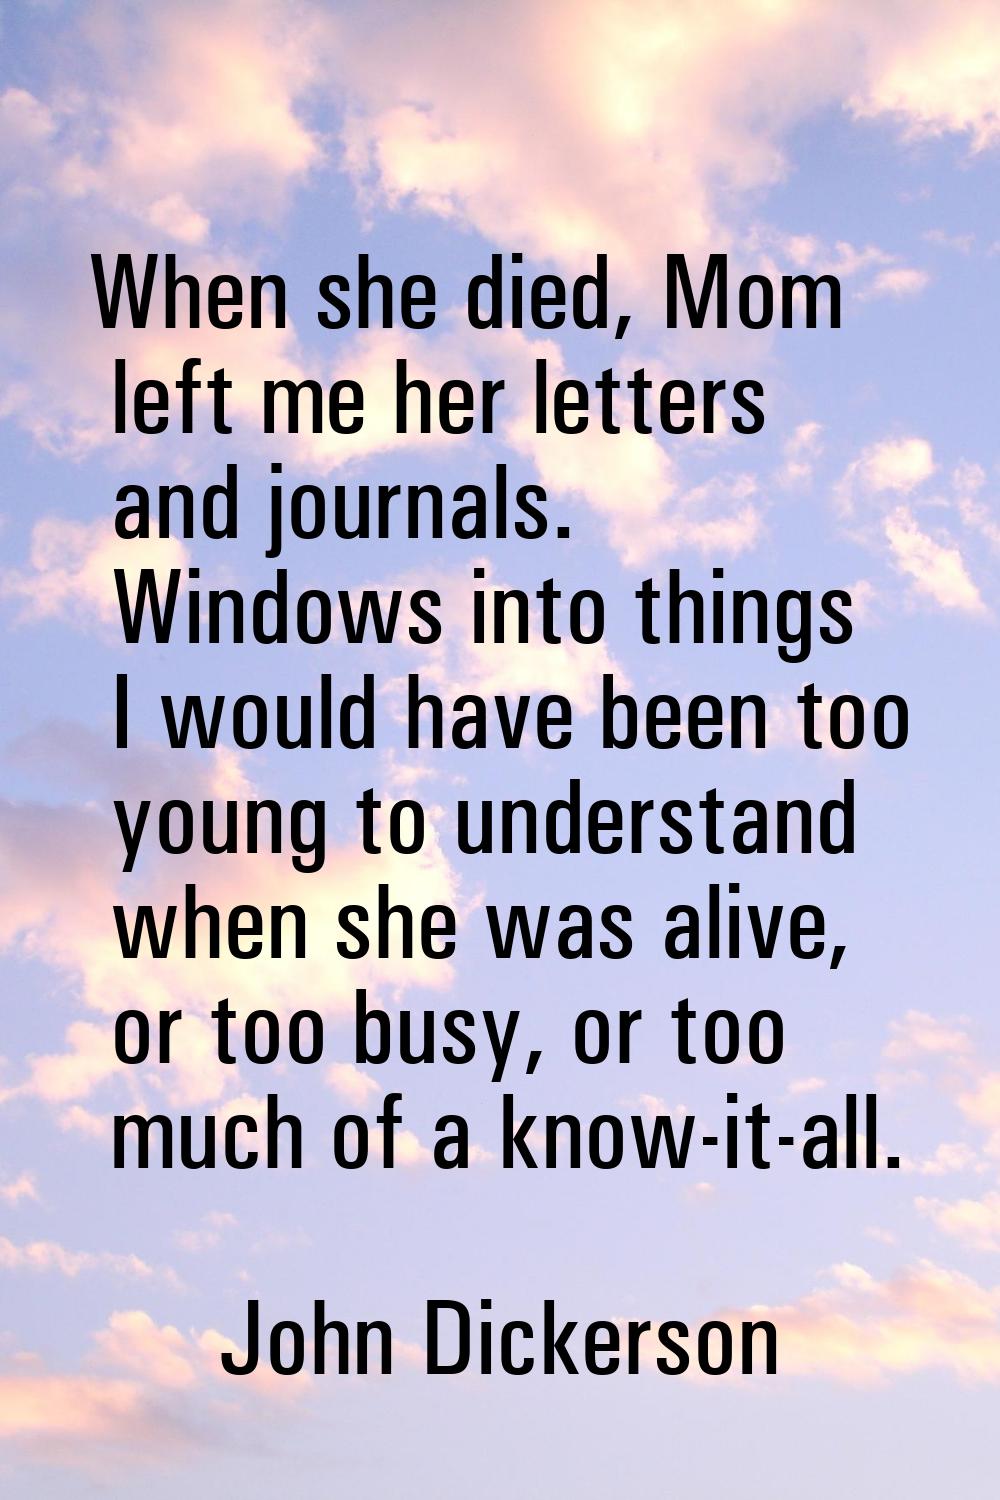 When she died, Mom left me her letters and journals. Windows into things I would have been too youn